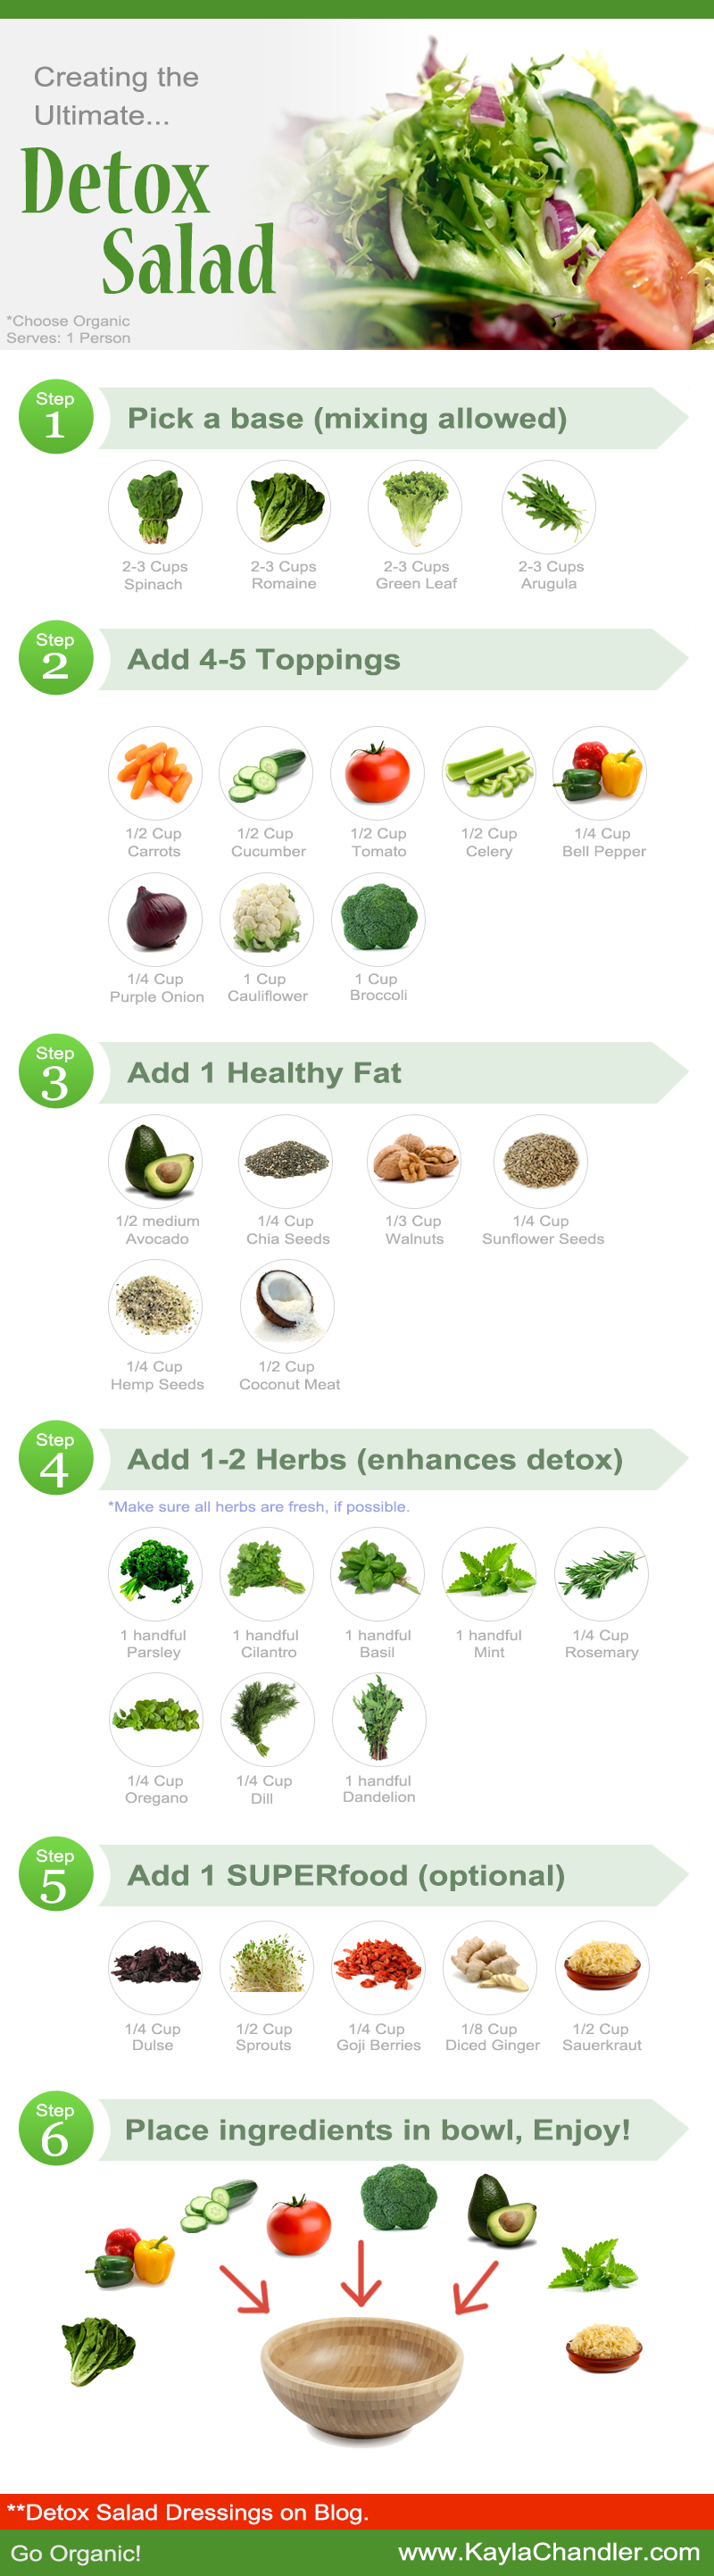 The Ultimate Detox Salad Recipe: Find It Here Infographic